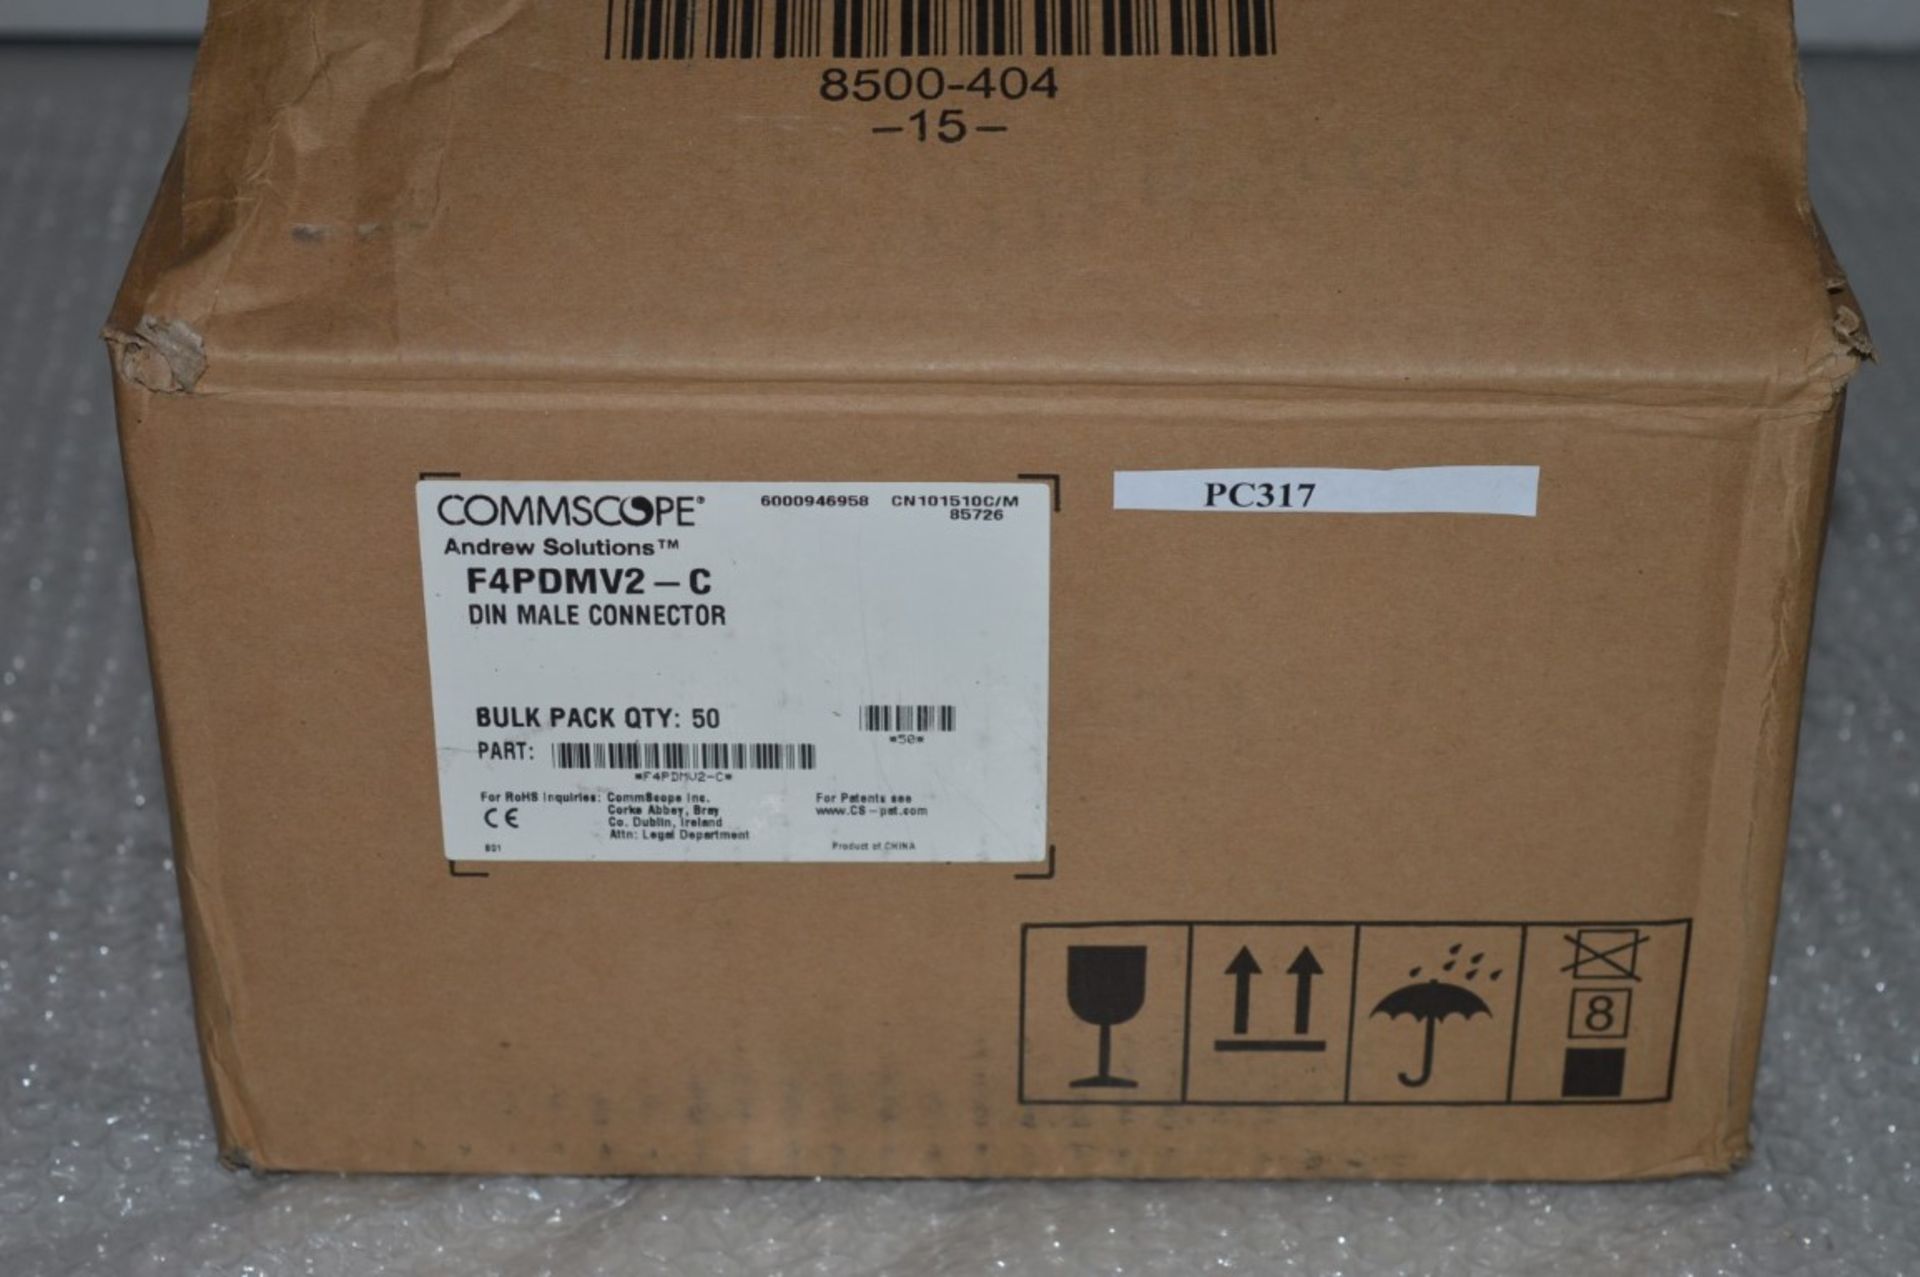 50 x Commscope F4PDMV2-C Din Male Connectors - Andrew Solutions - Brand New Boxed Stock - CL300 - - Image 5 of 5